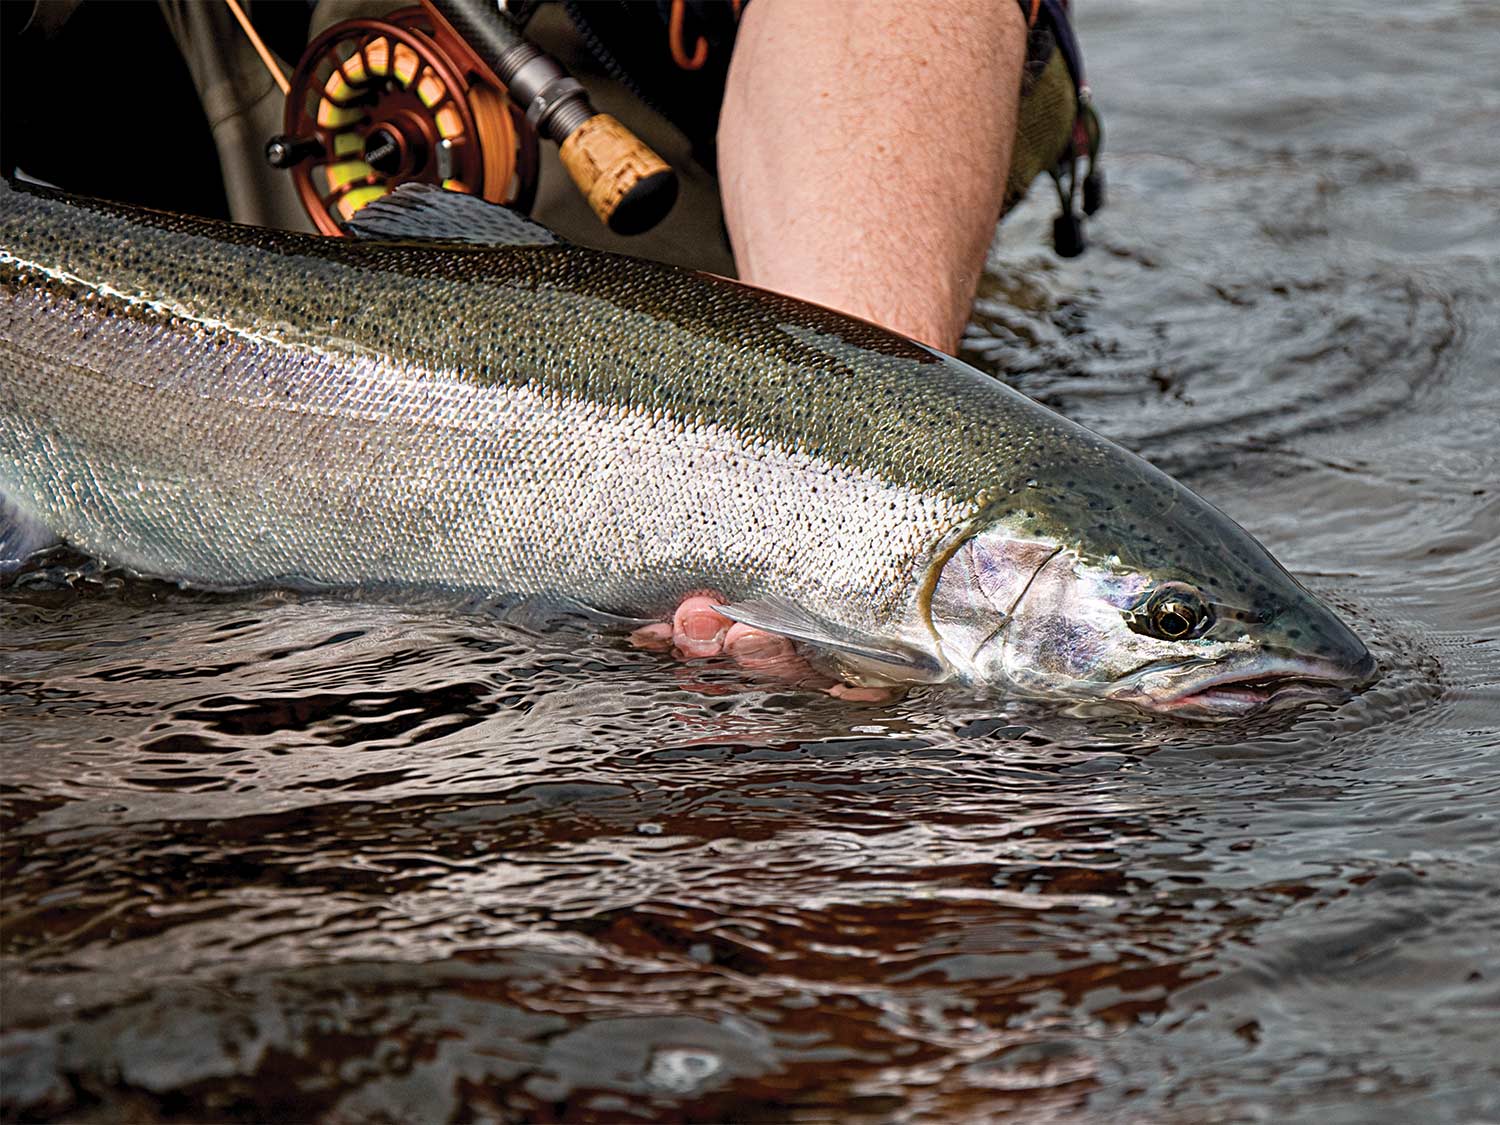 Salmon Fishing With Beads - Ontario Trout And Steelhead